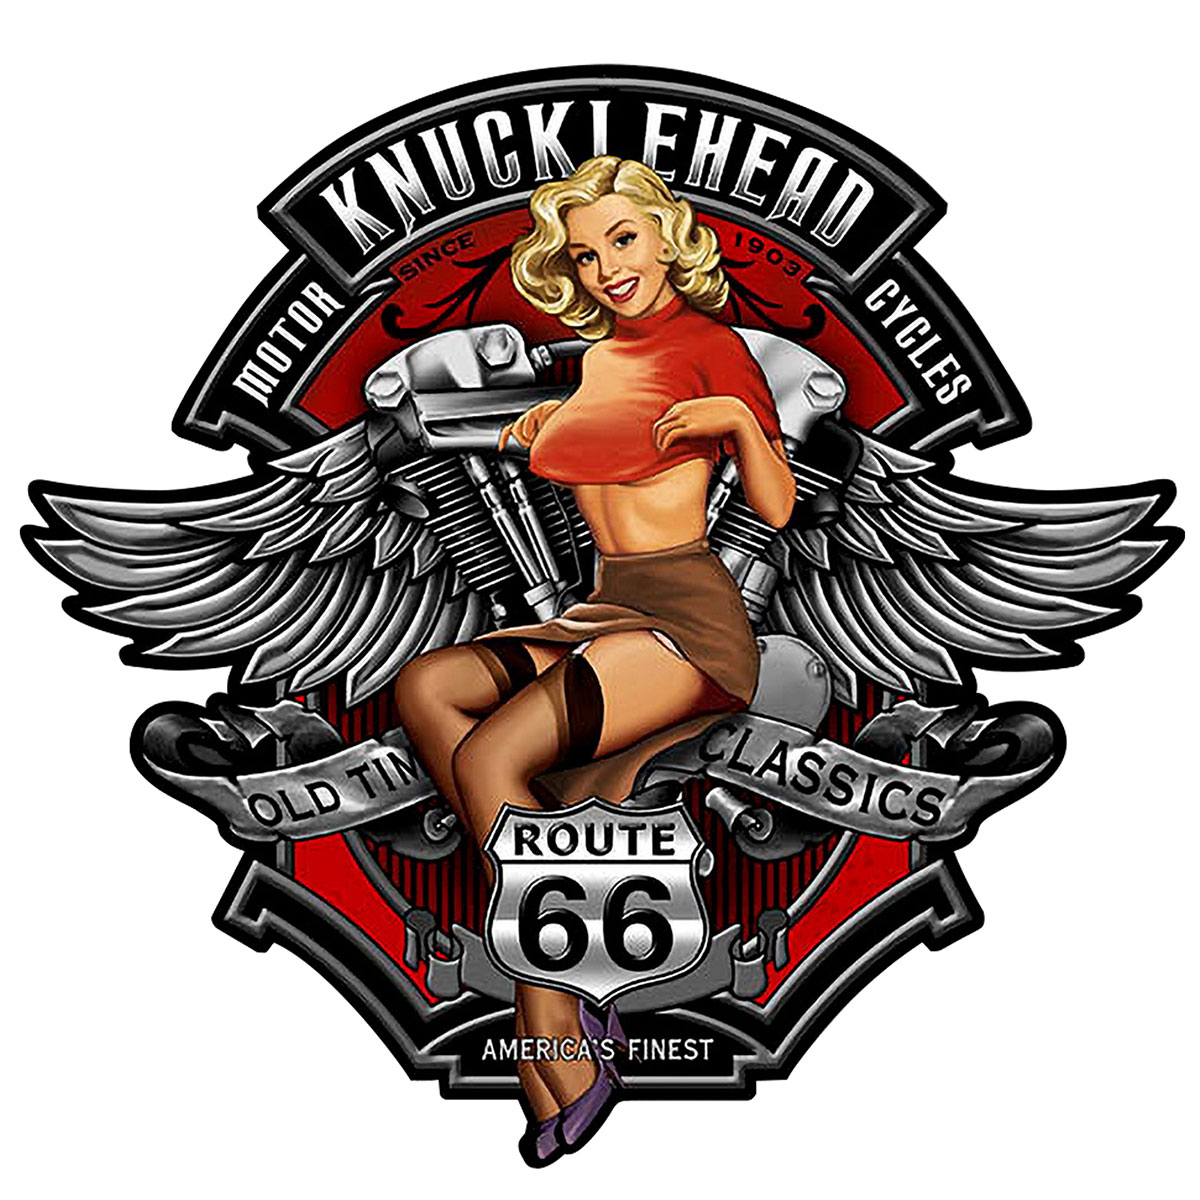 Plaque pin up knucklehead